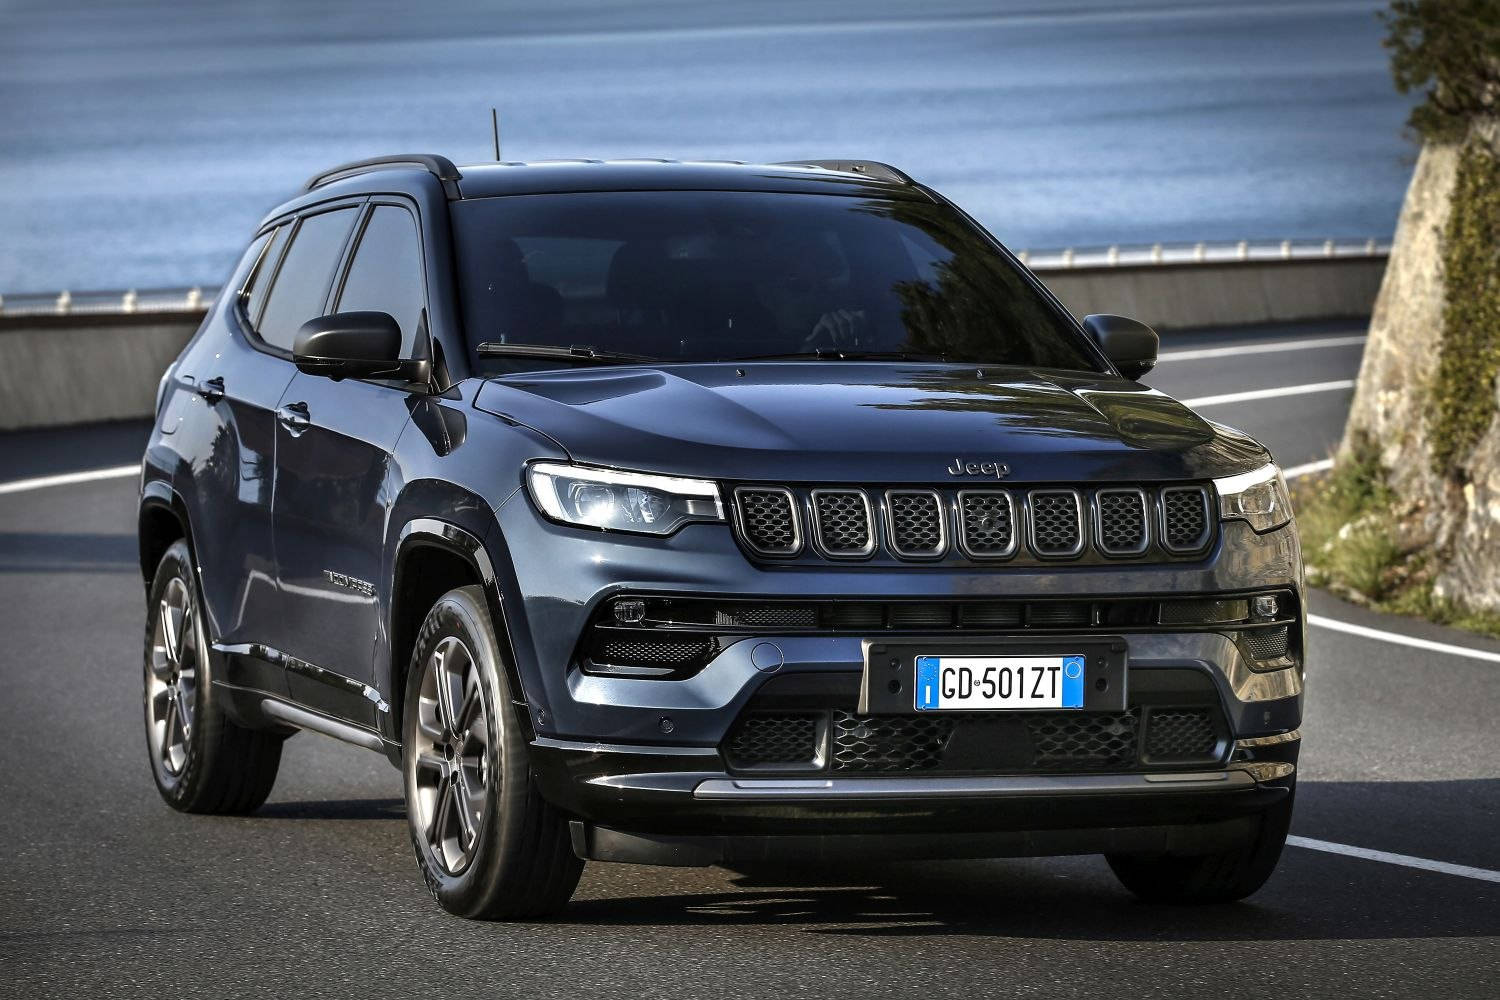 Jeep Compass Dark Blue On Curved Road Picture